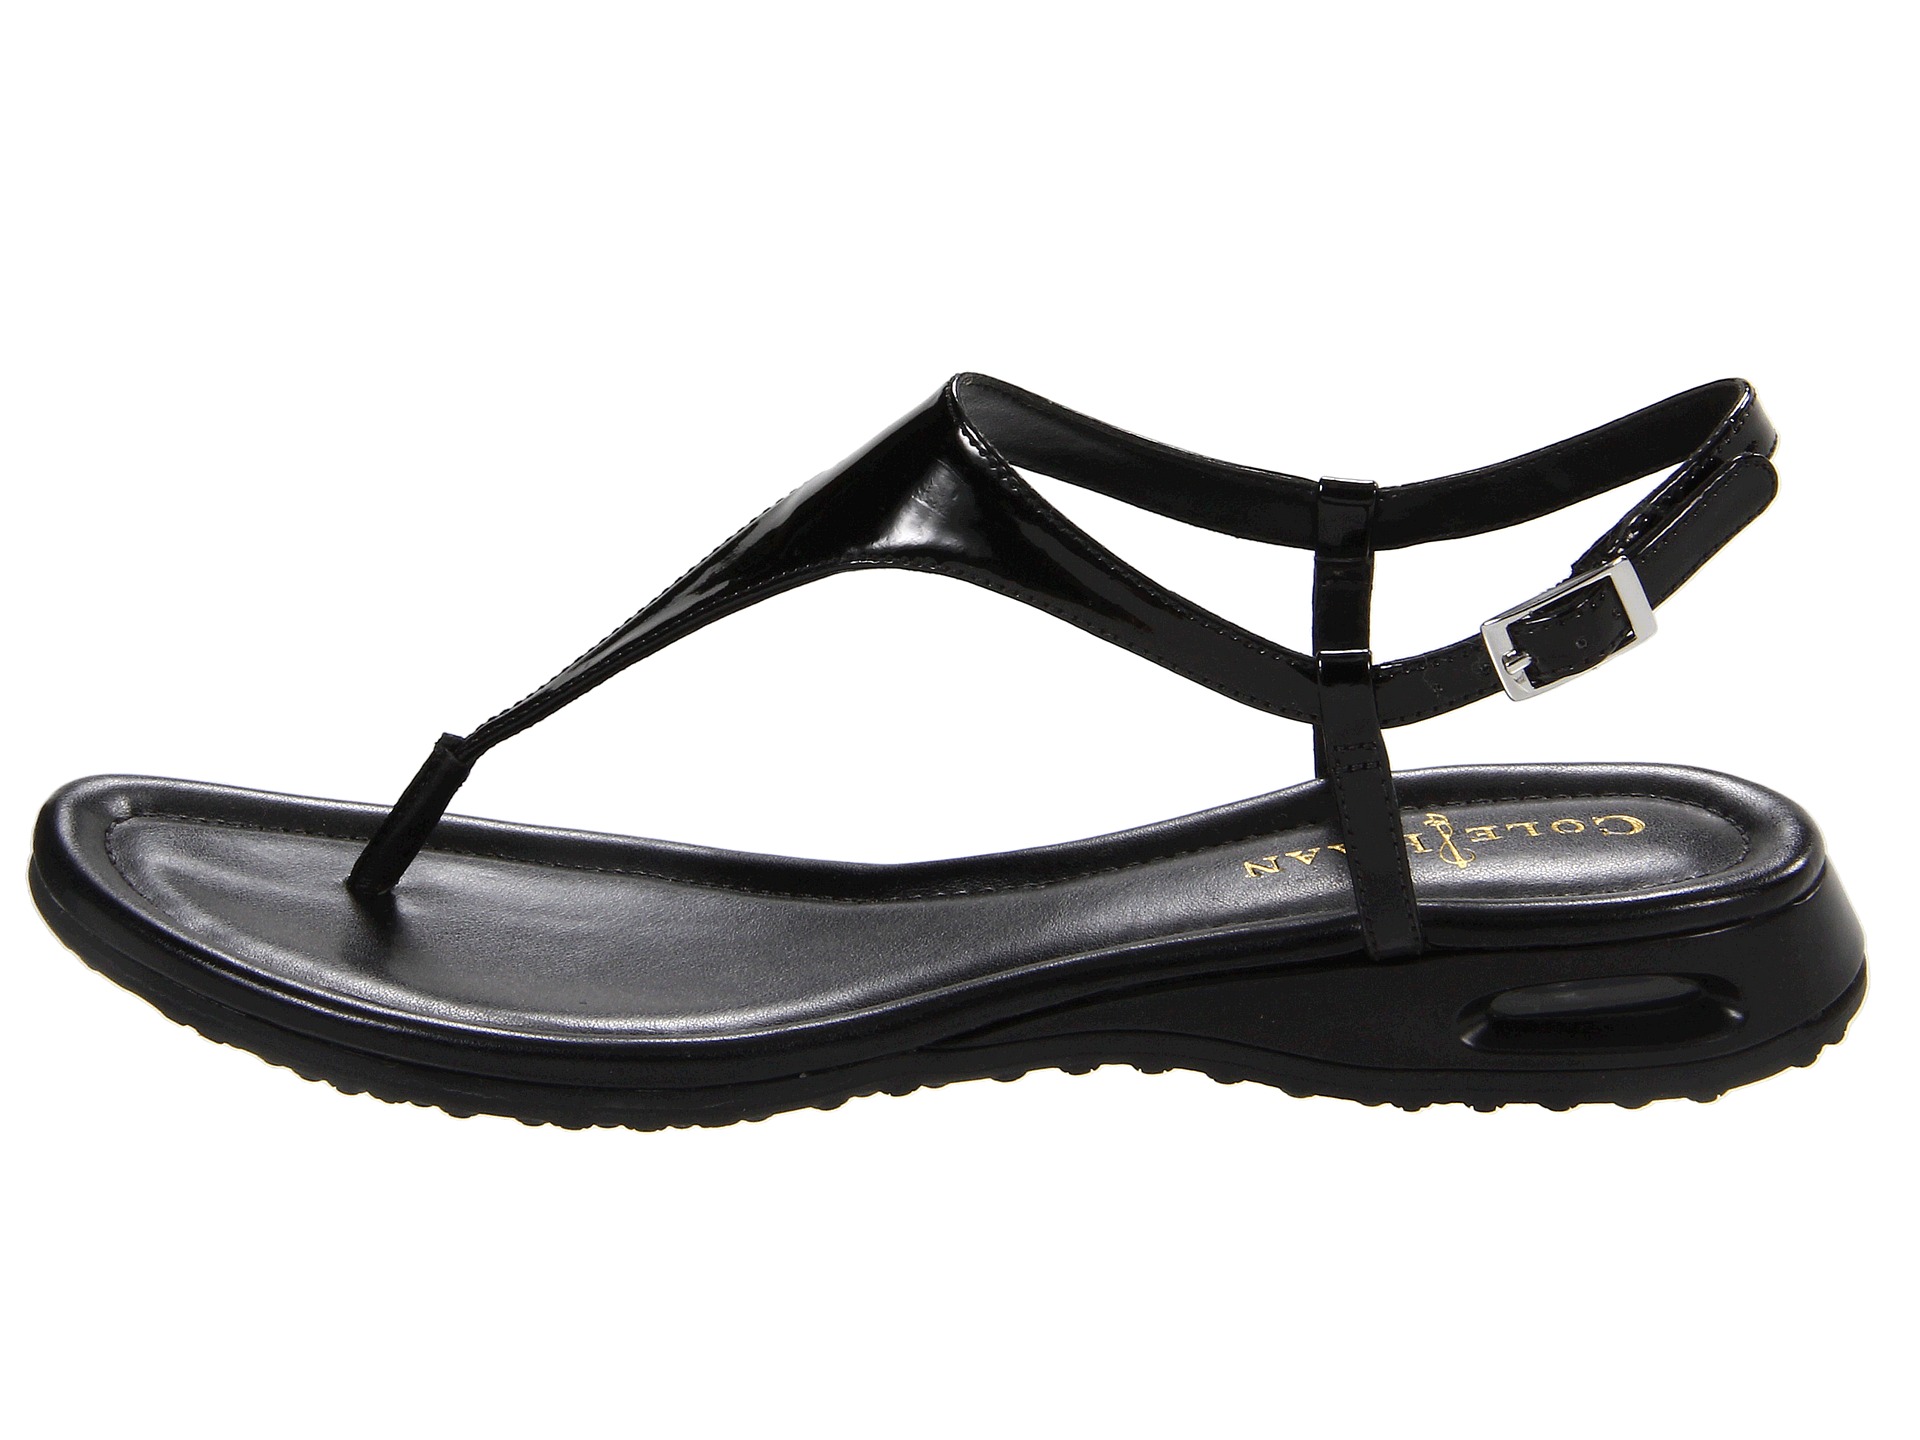 Cole Haan Air Bria Thong Sandal, Shoes | Shipped Free at Zappos